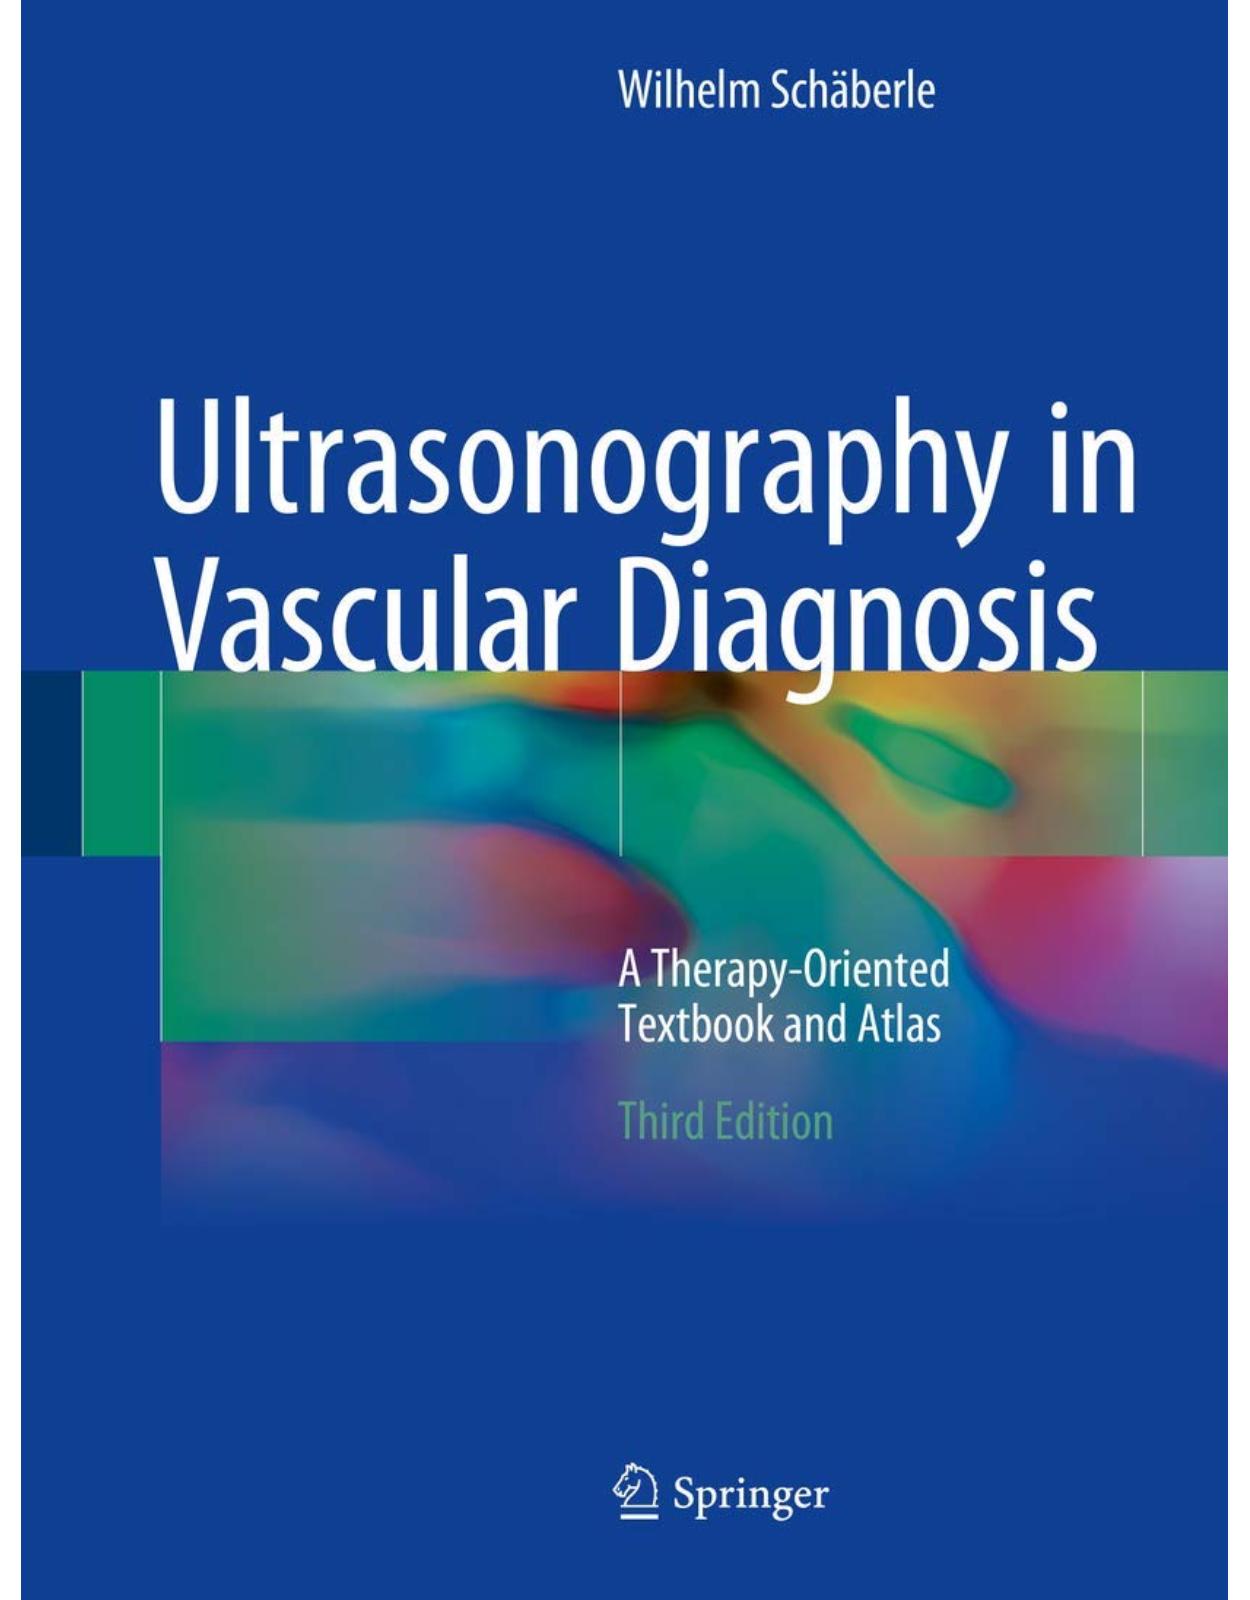 Ultrasonography in Vascular Diagnosis: A Therapy-Oriented Textbook and Atlas 